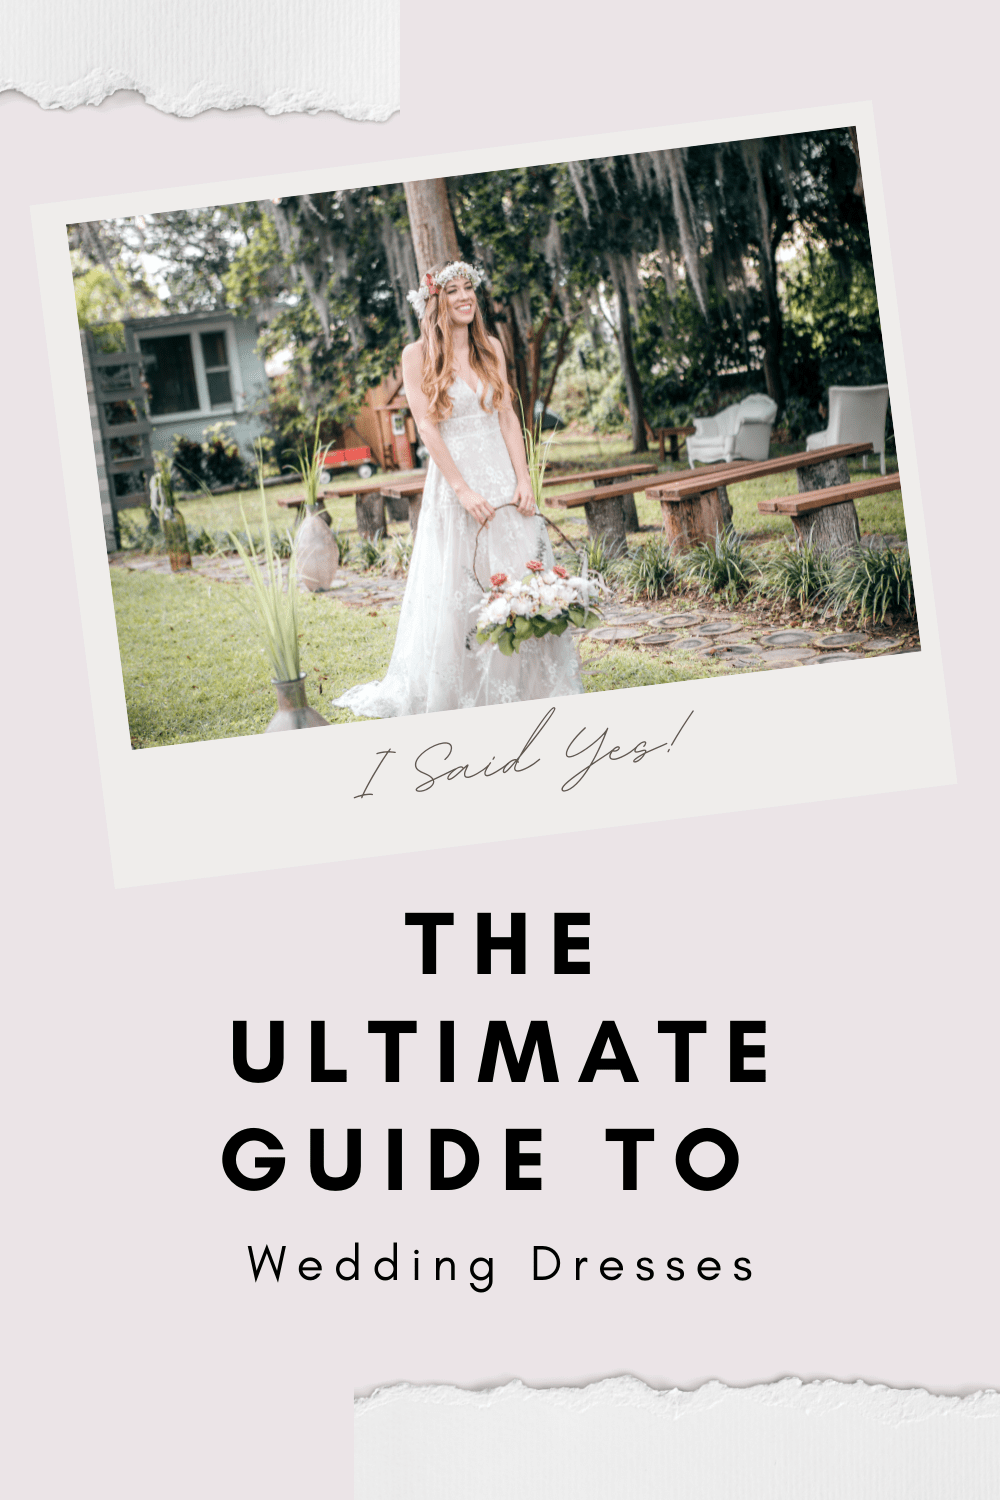 The Ultimate Guide To Wedding Dresses